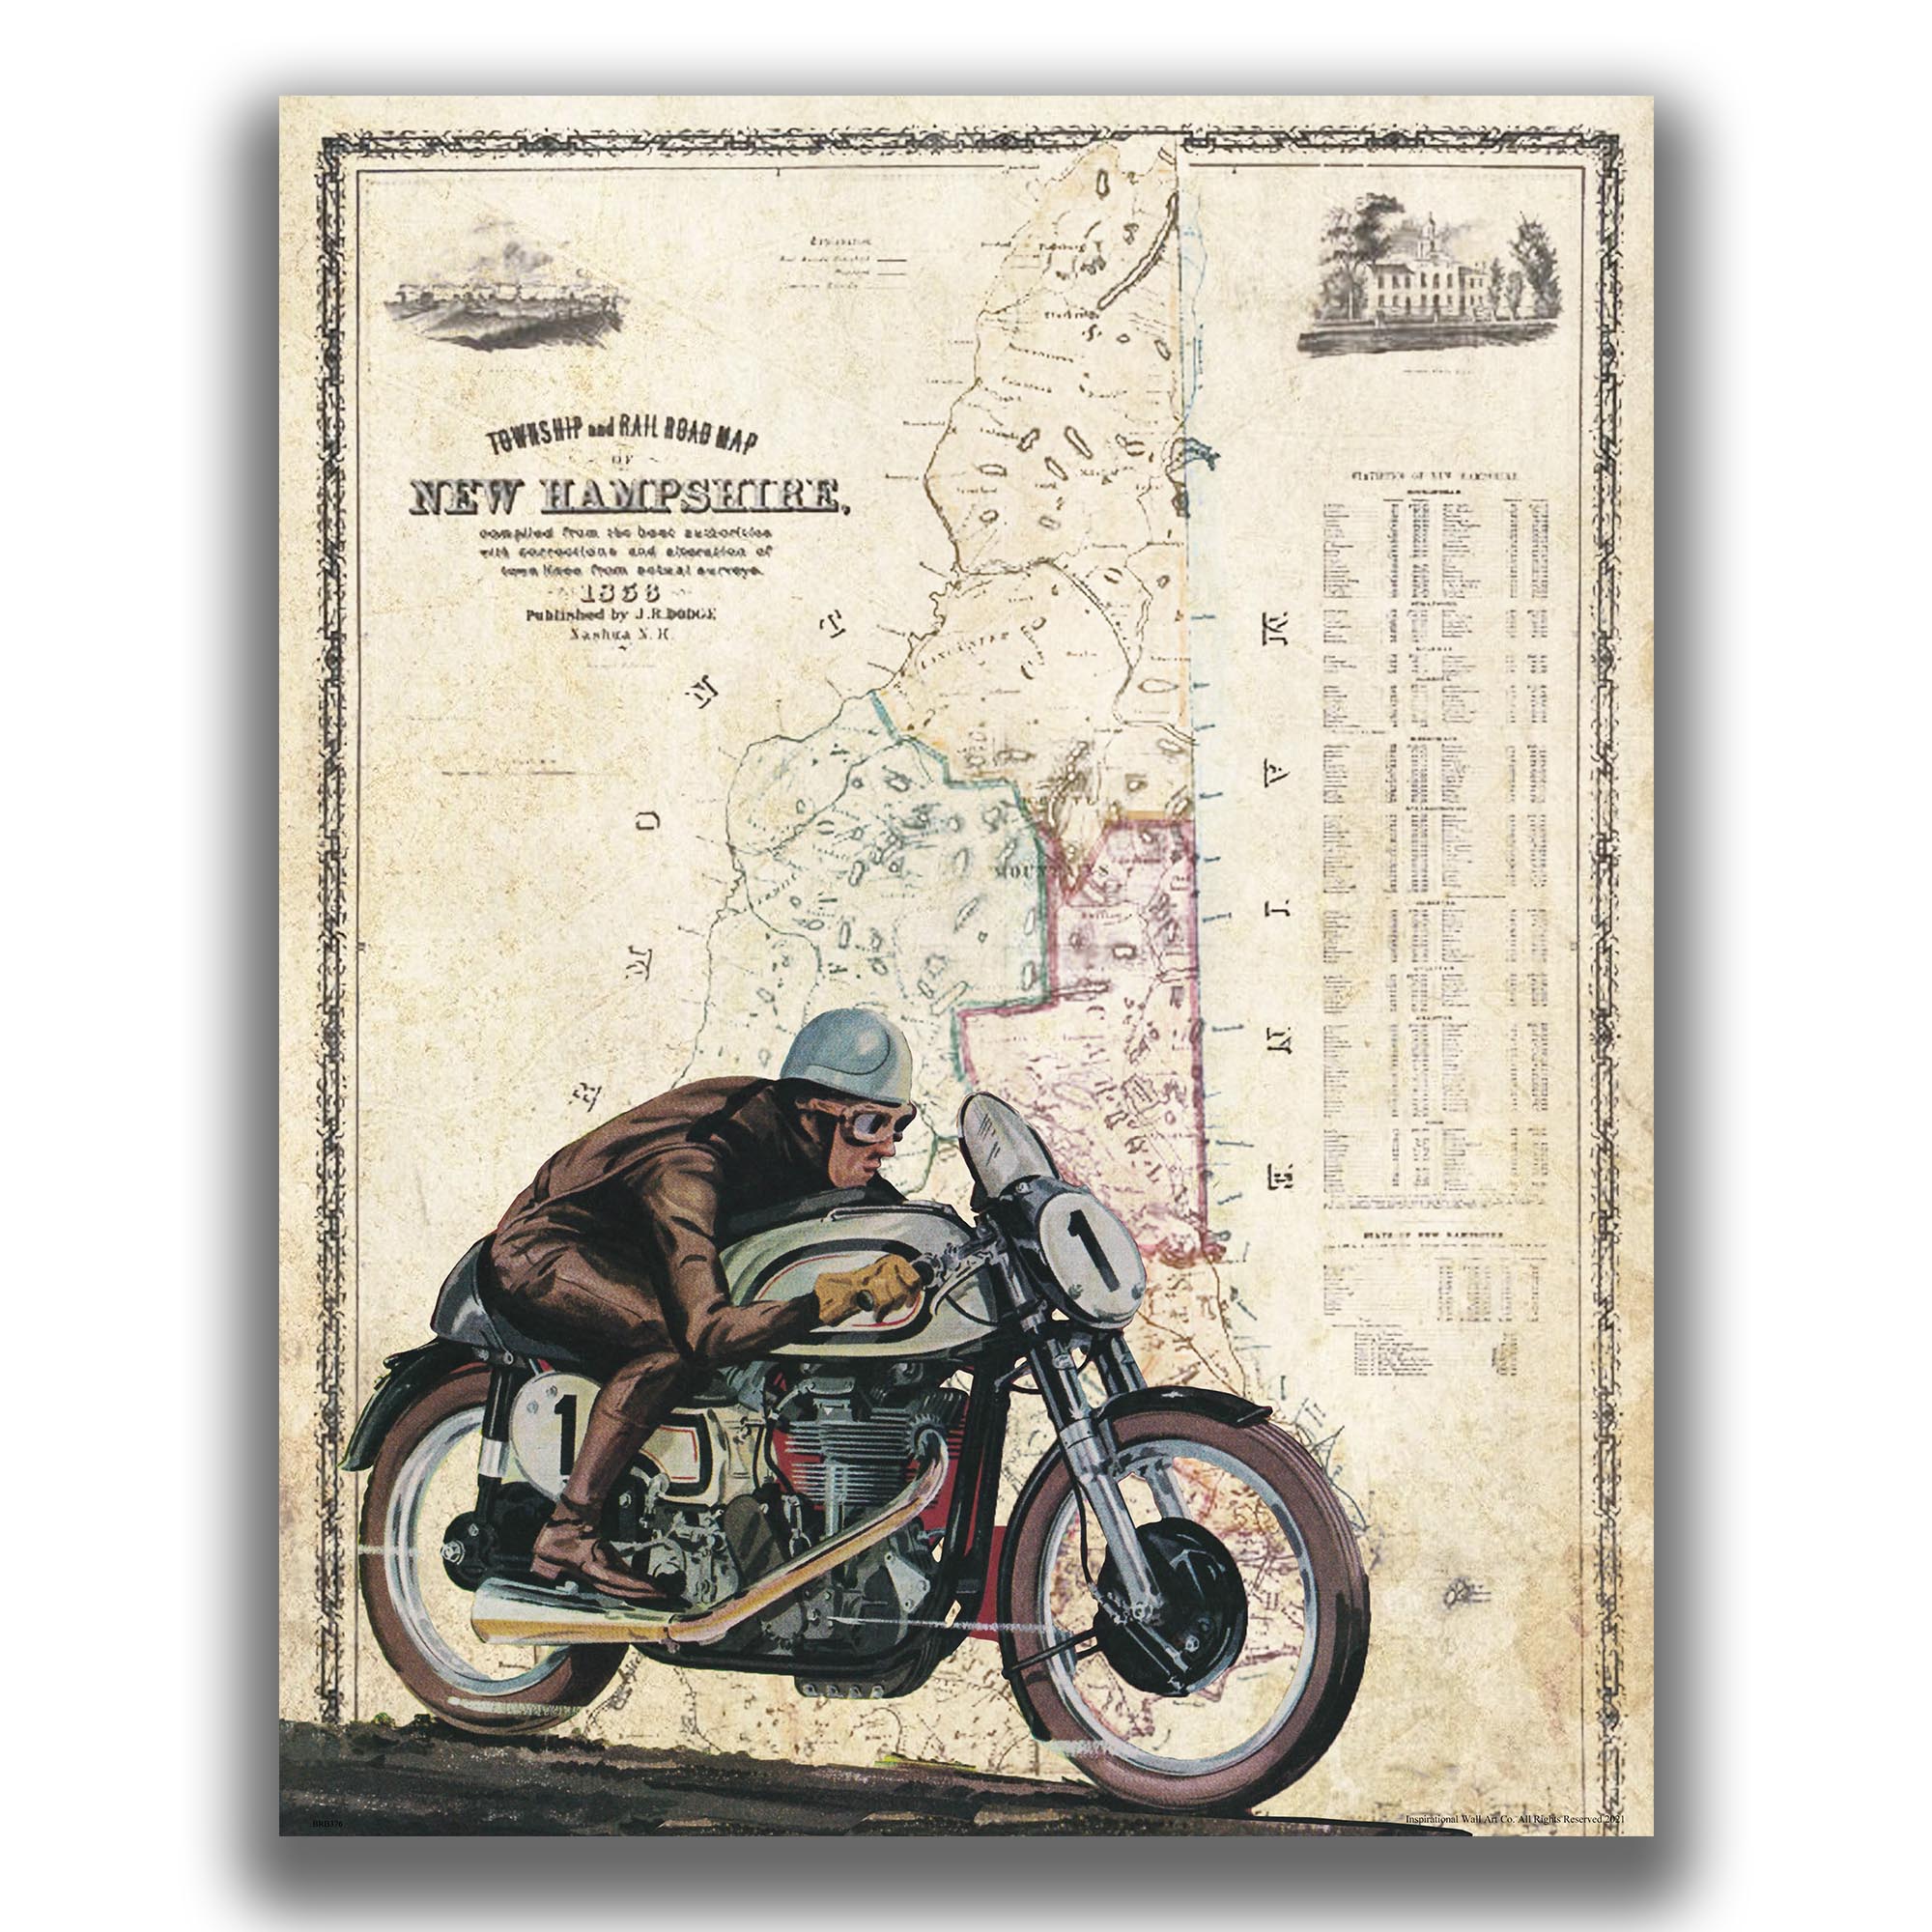 New Hampshire - Motorcycle Poster